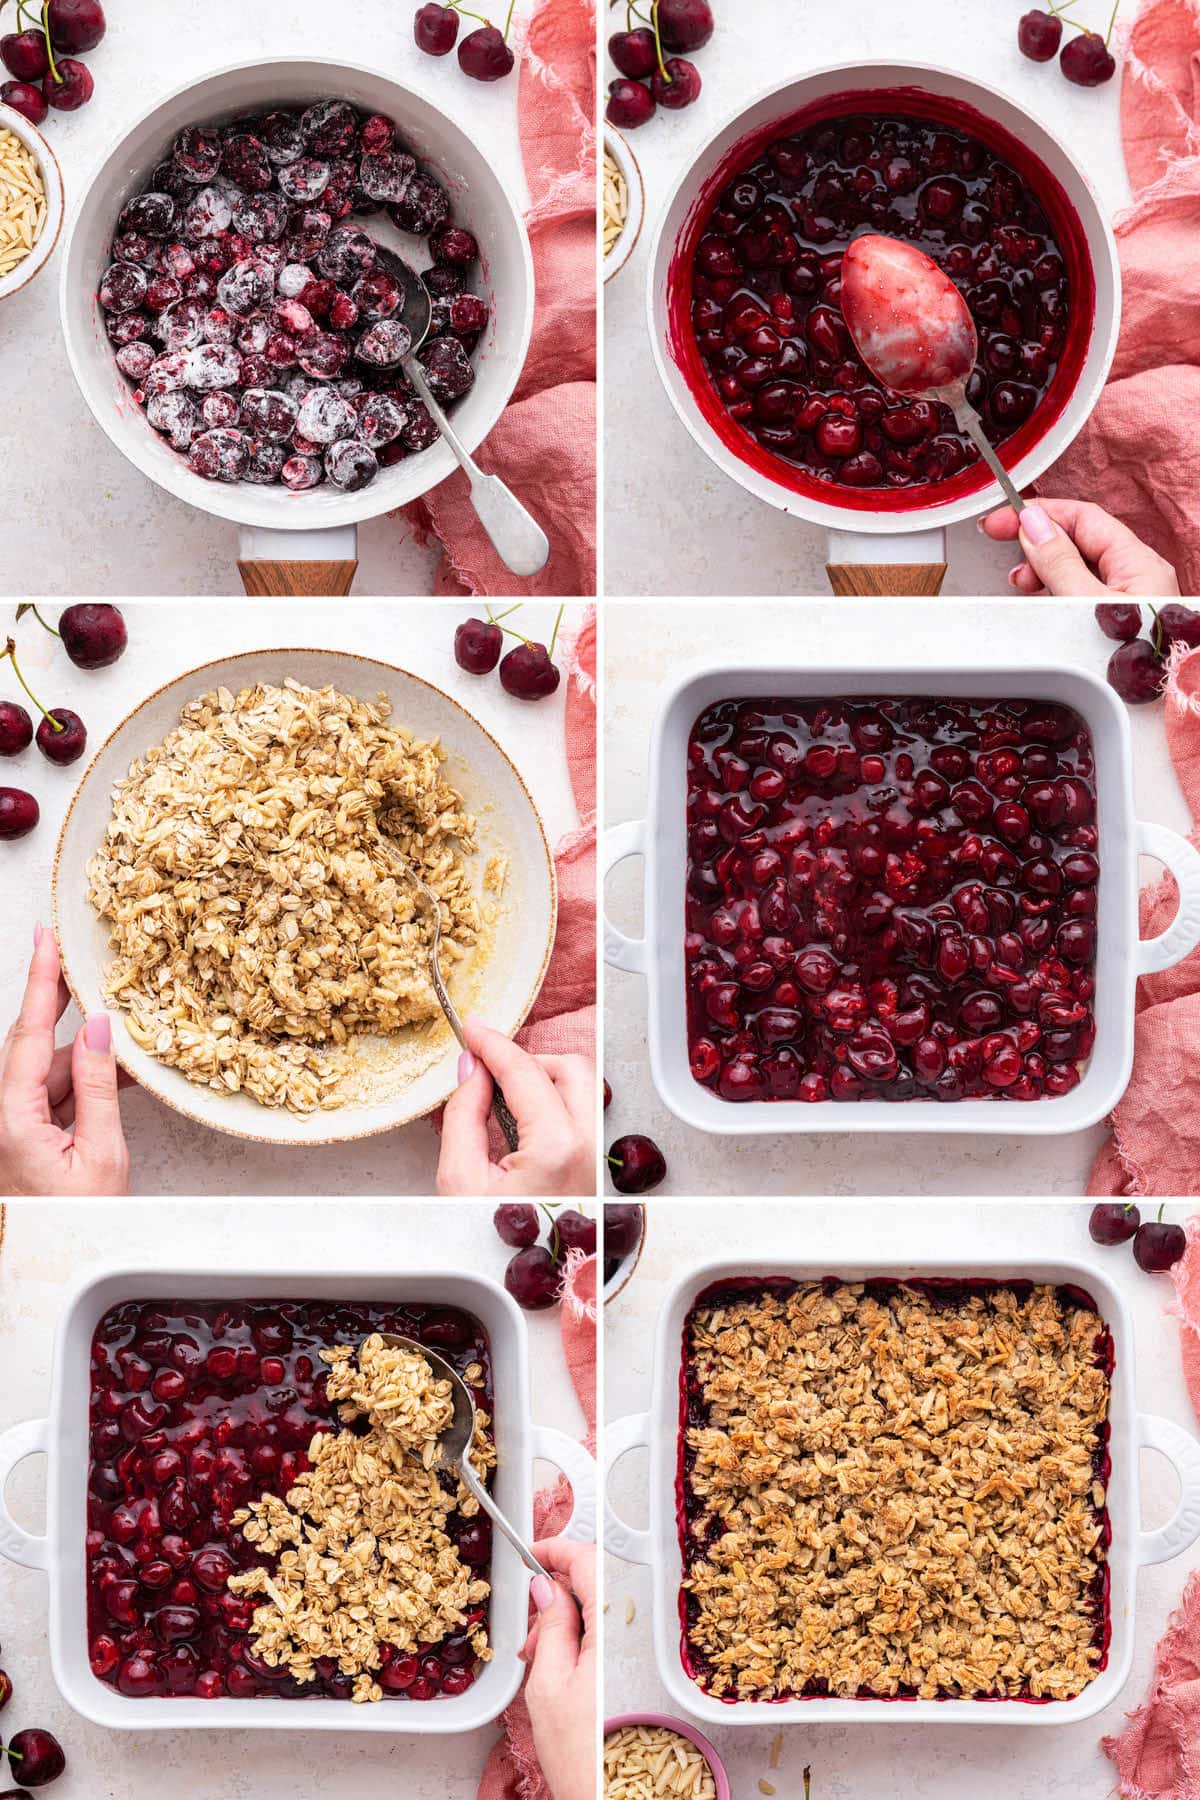 Six photos showing the steps to making Healthy Cherry Crisp: making cherry fitting in a small pot, making oatmeal crumble, and then topping the oat crumble on the cherries in a baking dish and baking.